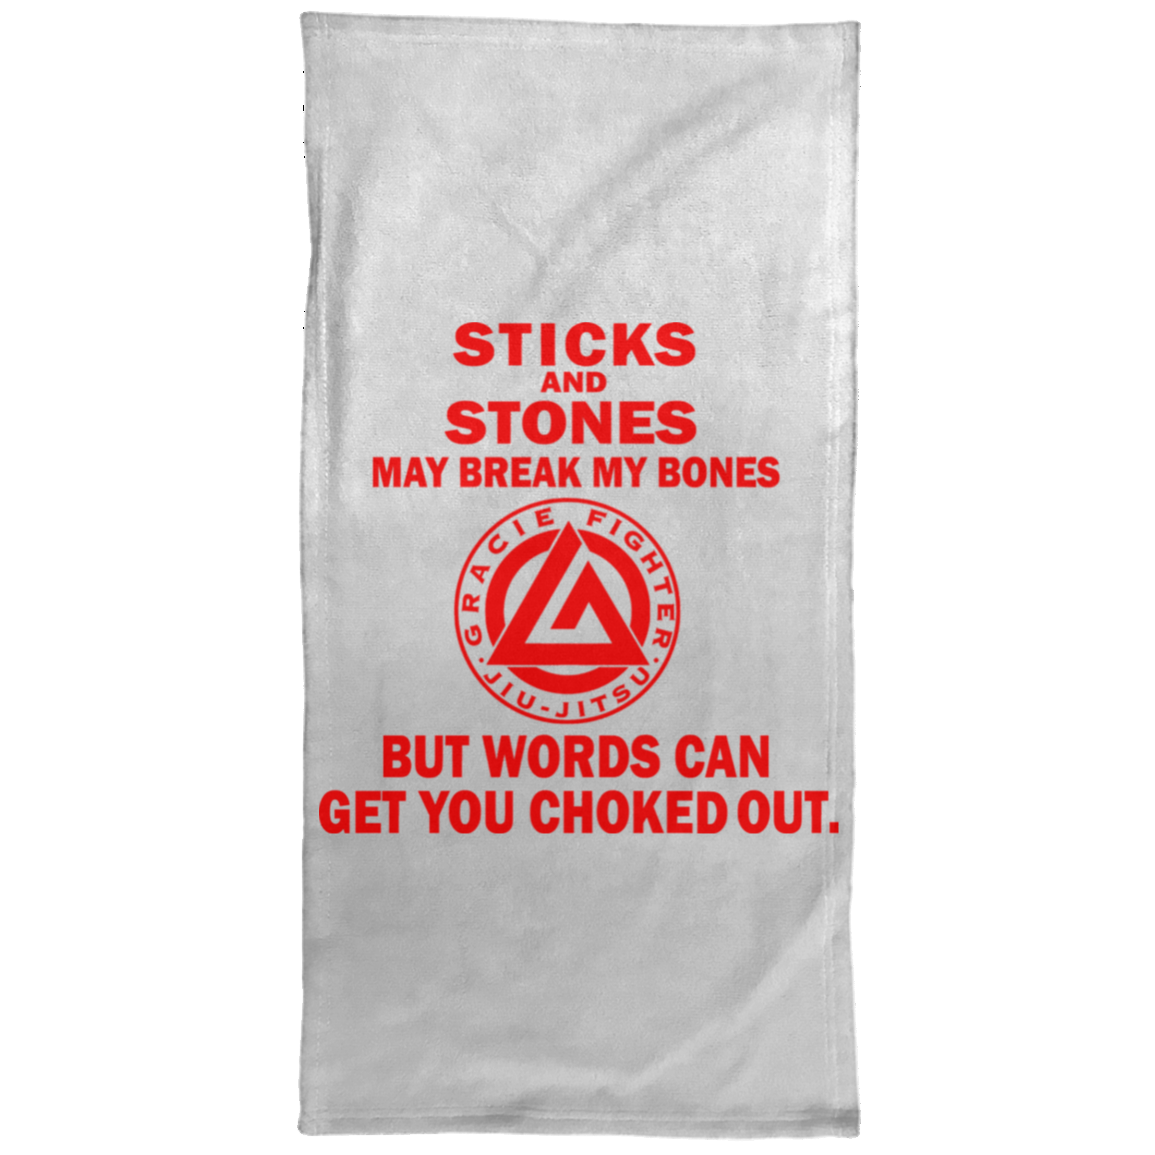 Artichoke Fight Gear Custom Design #16. Sticks And Stones May Break My Bones But Words Can Get You Choked Out. Gracie Fighter. BJJ. Hand Towel - 15x30